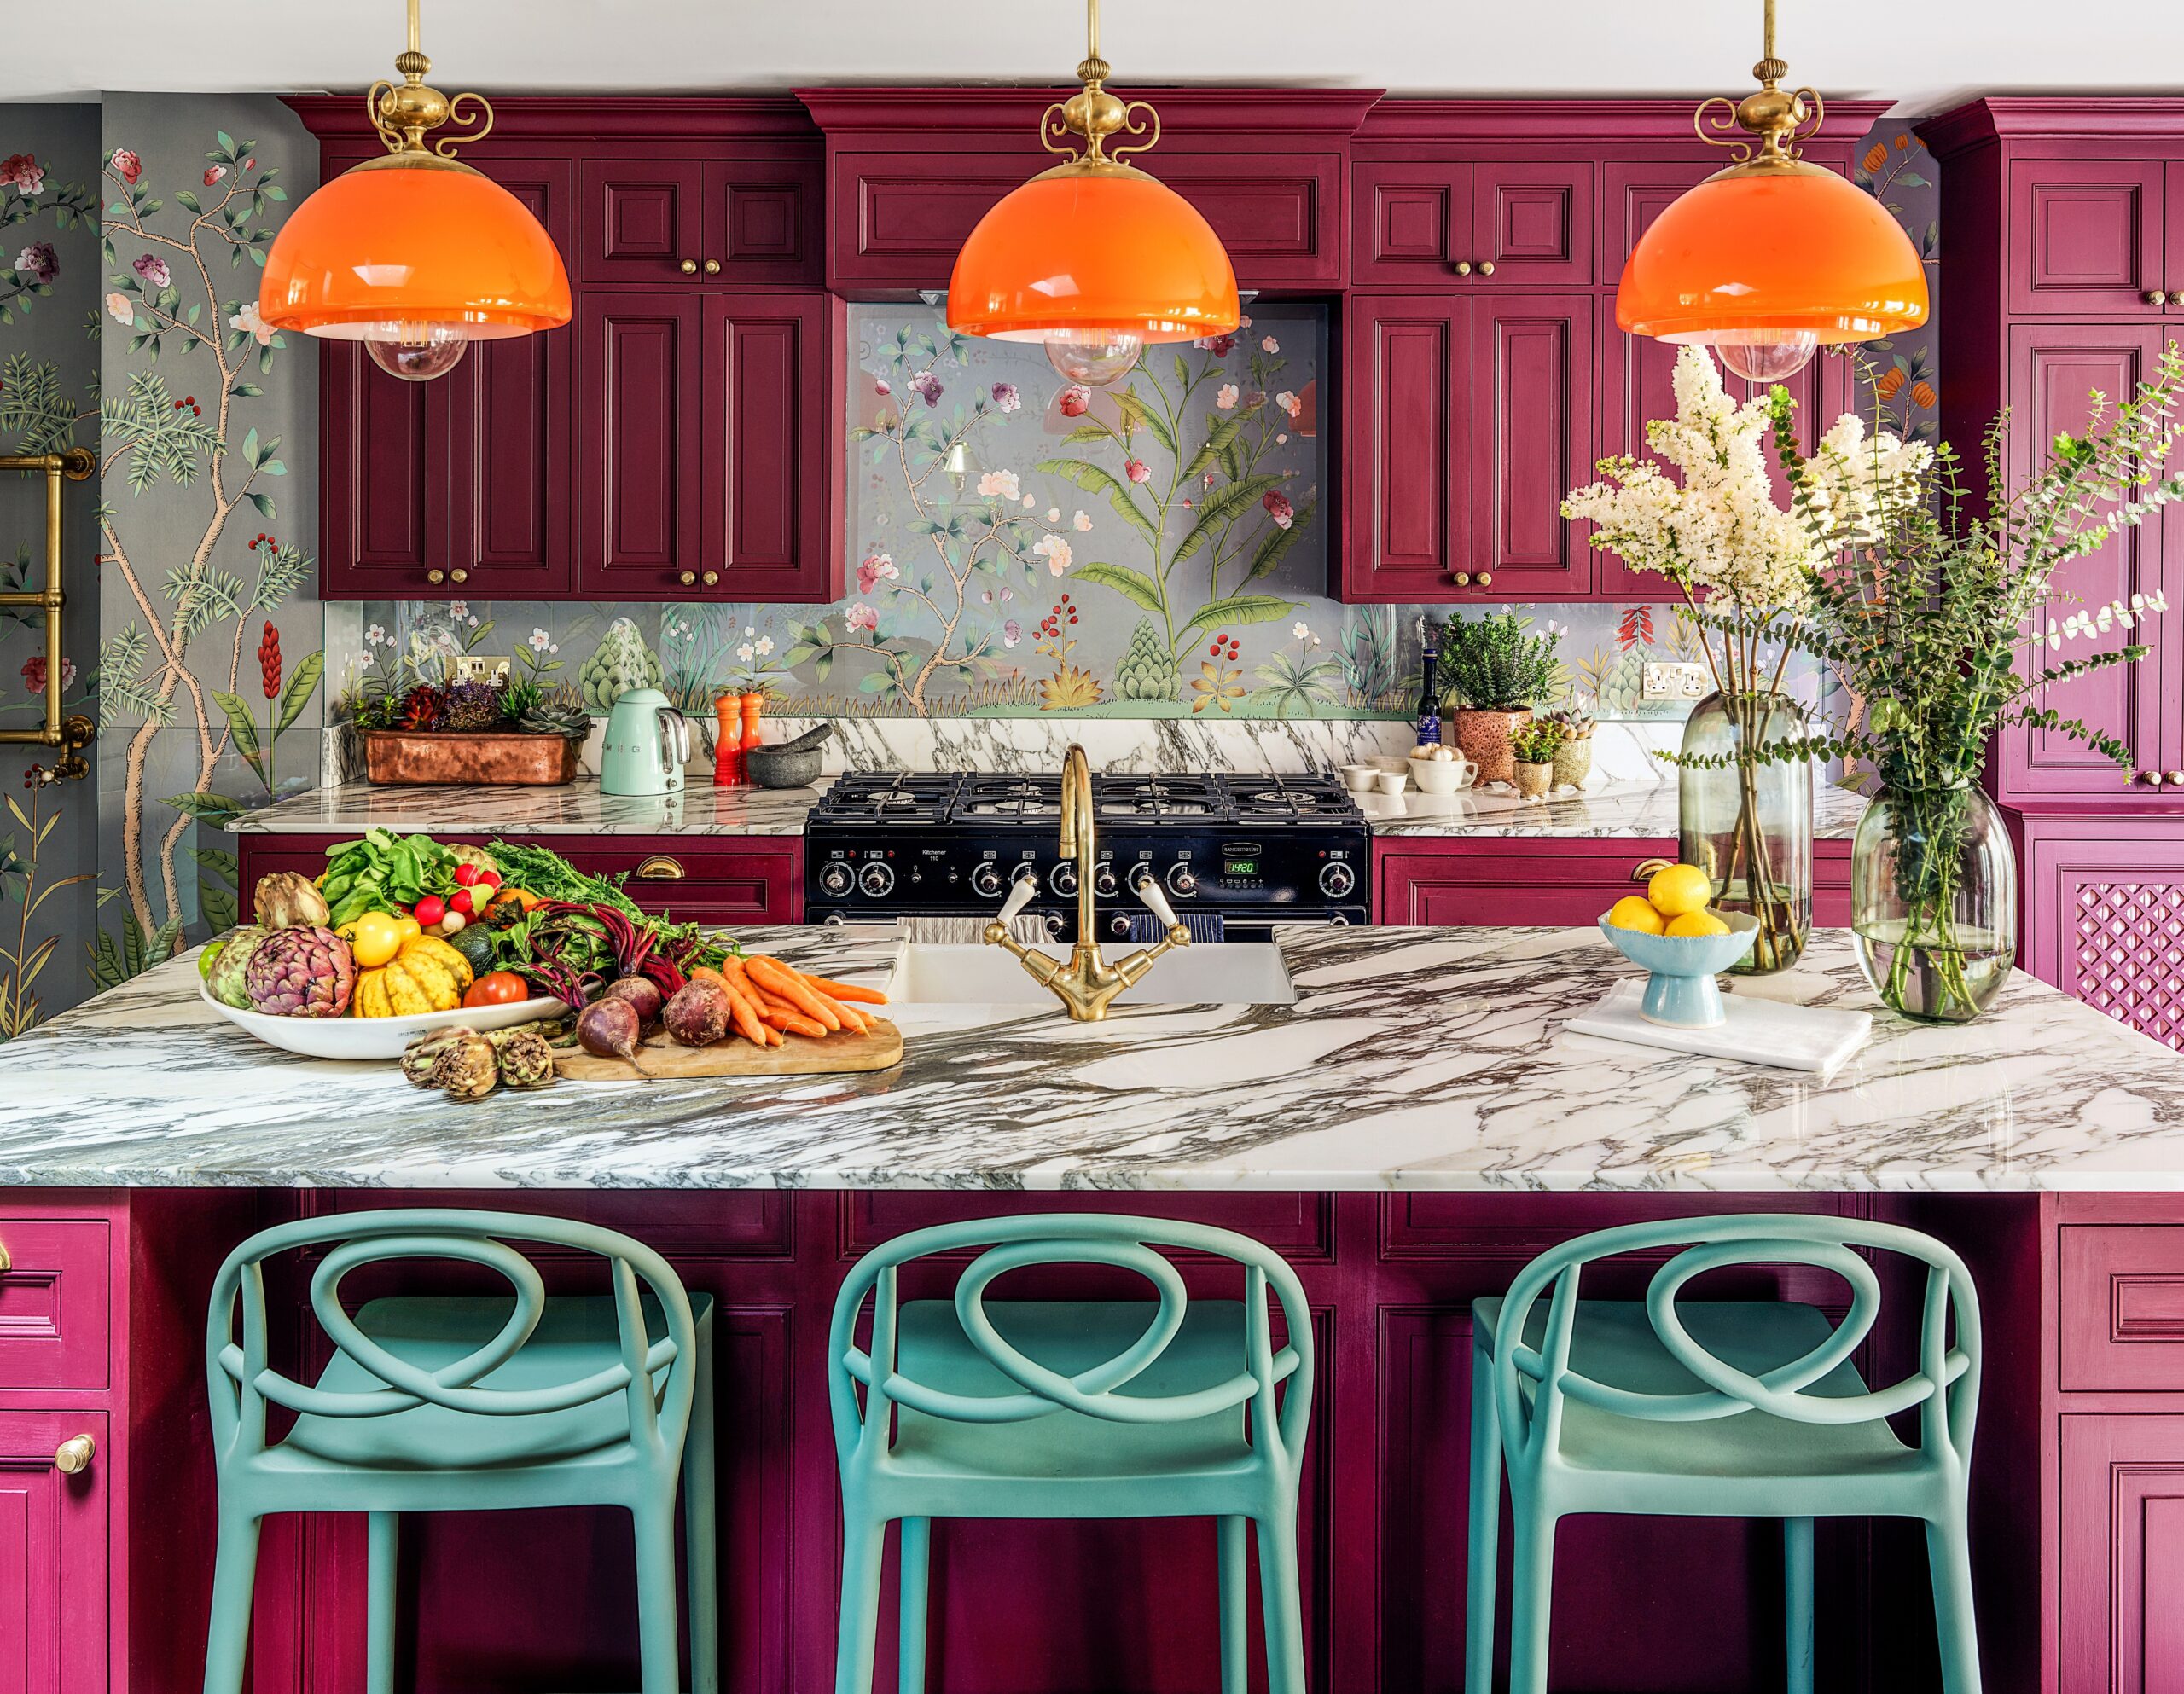 5 of the Best and Brightest Kitchens in AD  Architectural Digest - favorite kitchens architectural digest